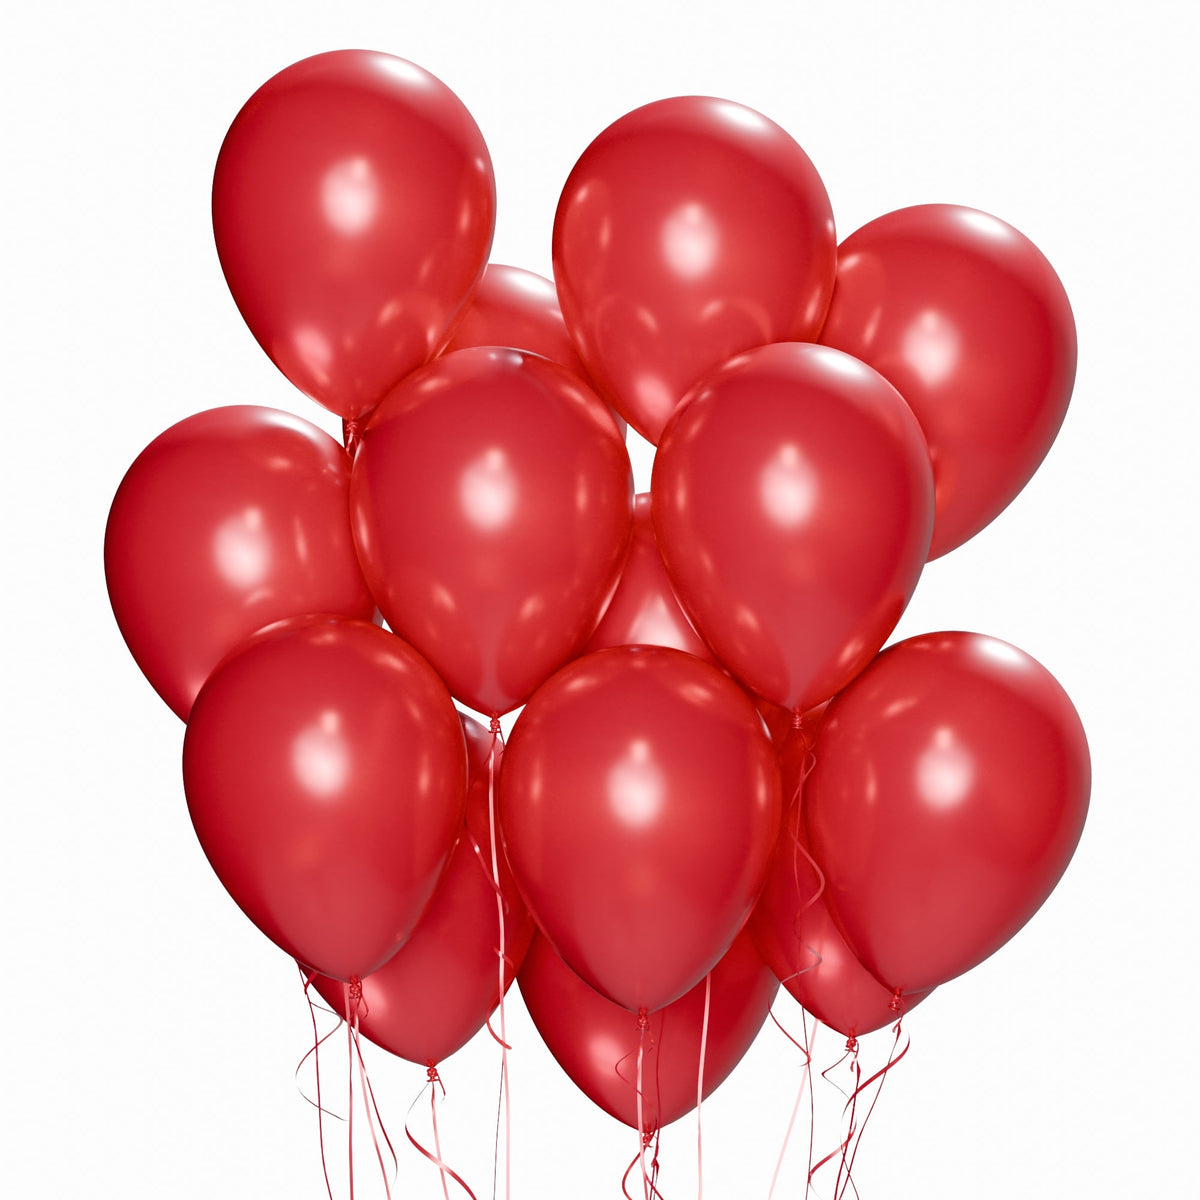 WIDE OCEAN INTERNATIONAL TRADE BEIJING CO., LTD Balloons Red Latex Balloon 12 Inches, Pearl Collection, 72 Count 810064197765